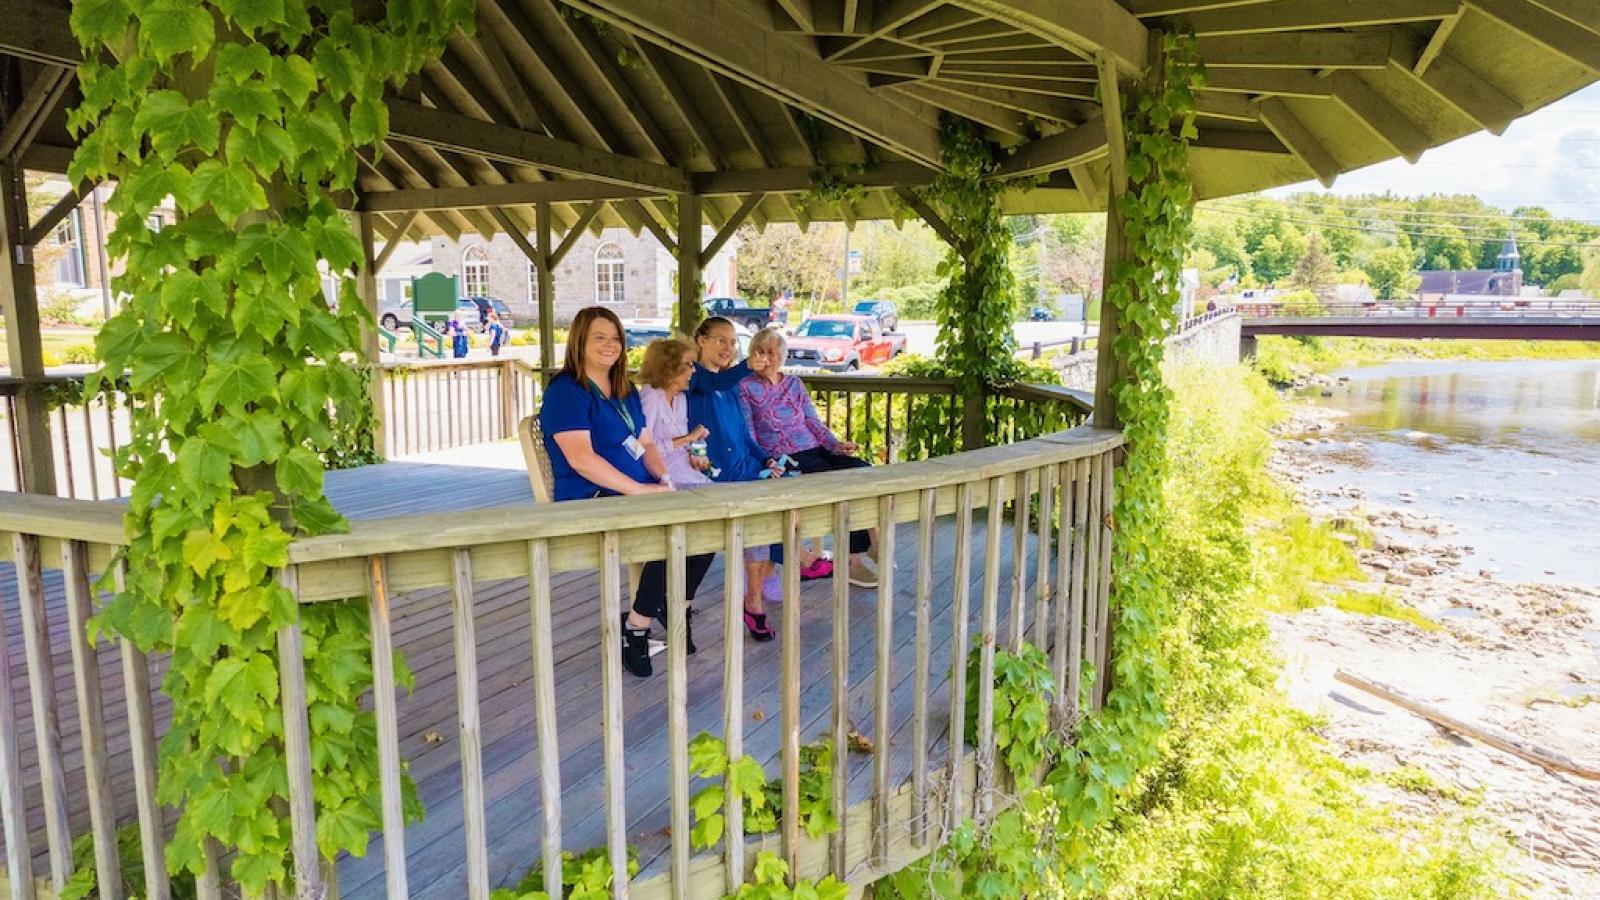 Two residents with two nurses, outside under a gazebo looking at the river.